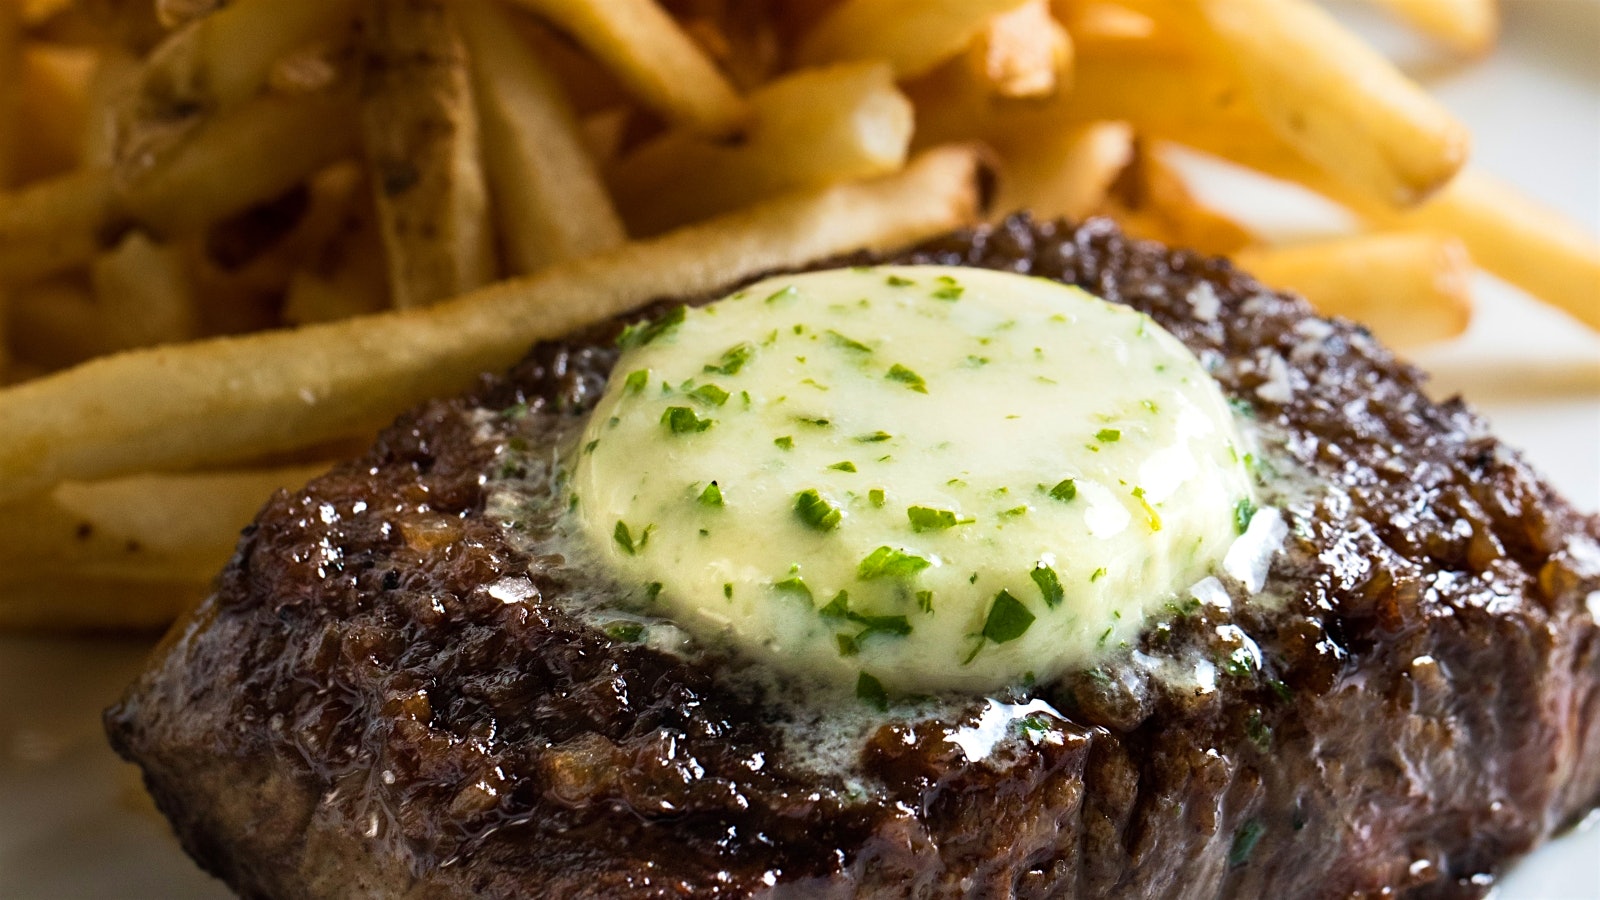  Steak frites at Bouchon Bistro in Coral Gables, Florida, with a pat of butter on top, and French fries on the plate